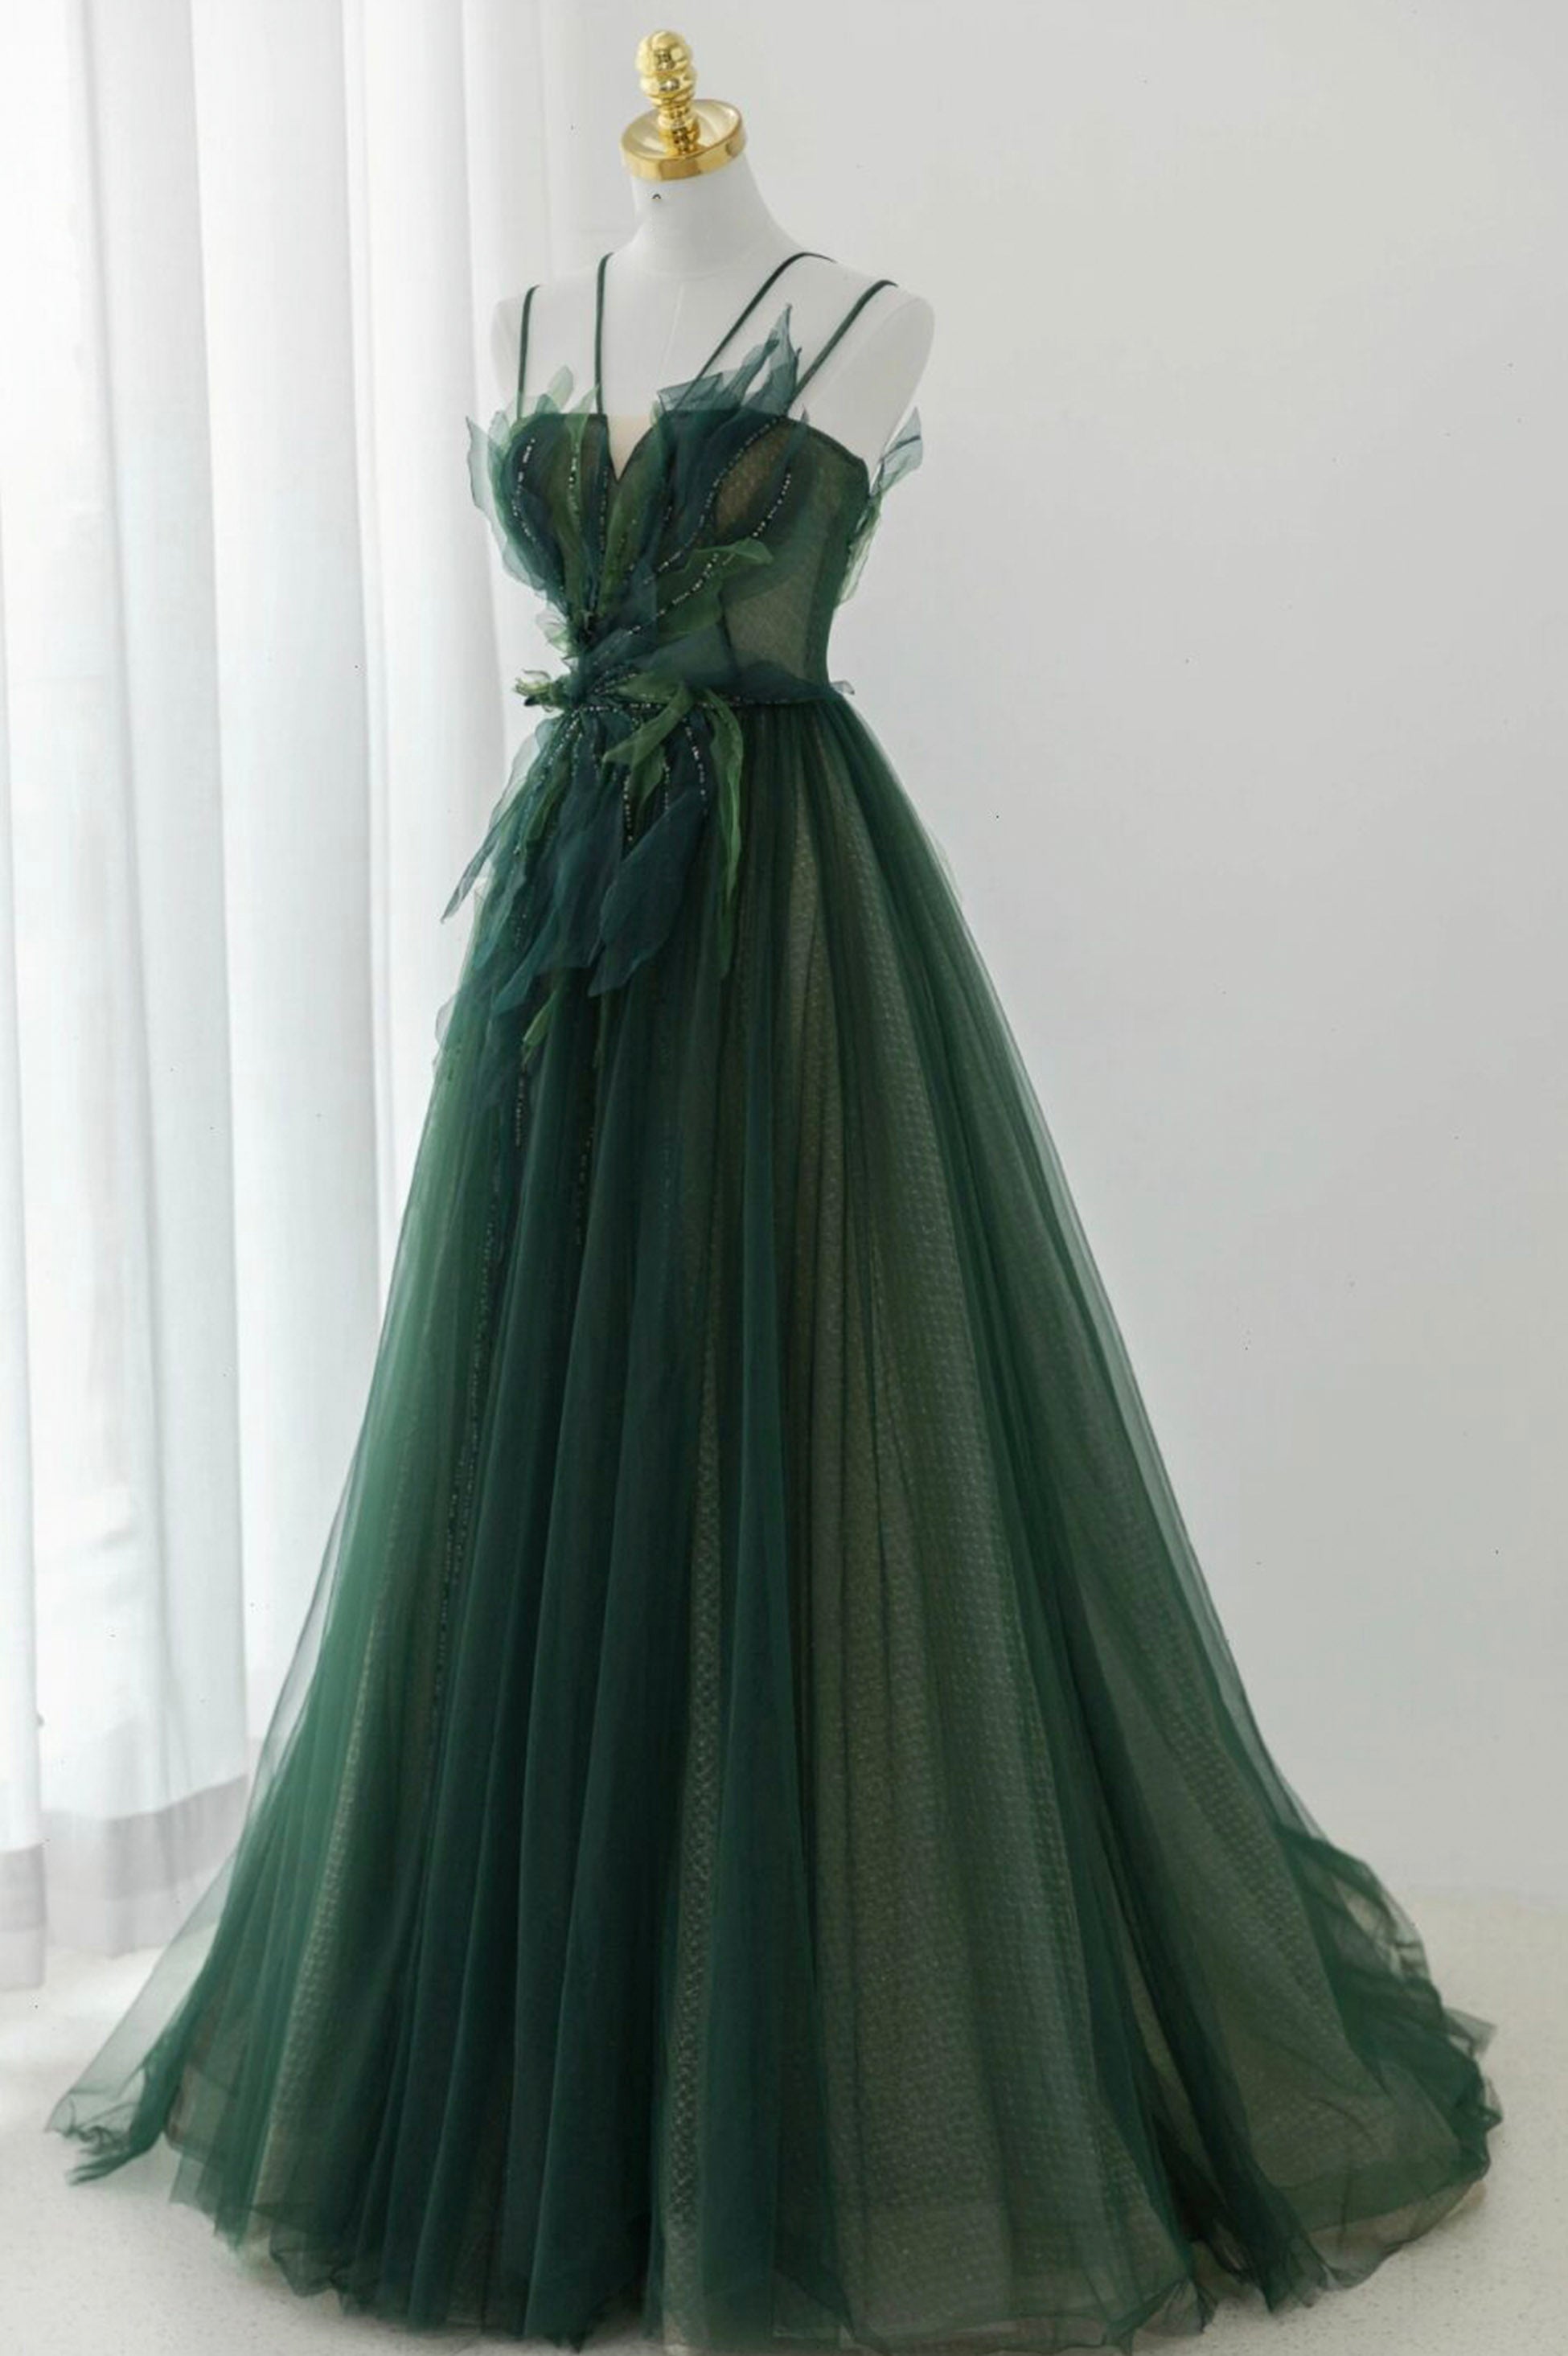 Green Tulle Long A-Line Corset Prom Dress, Green Corset Formal Evening Dress outfit, Prom Dress Black